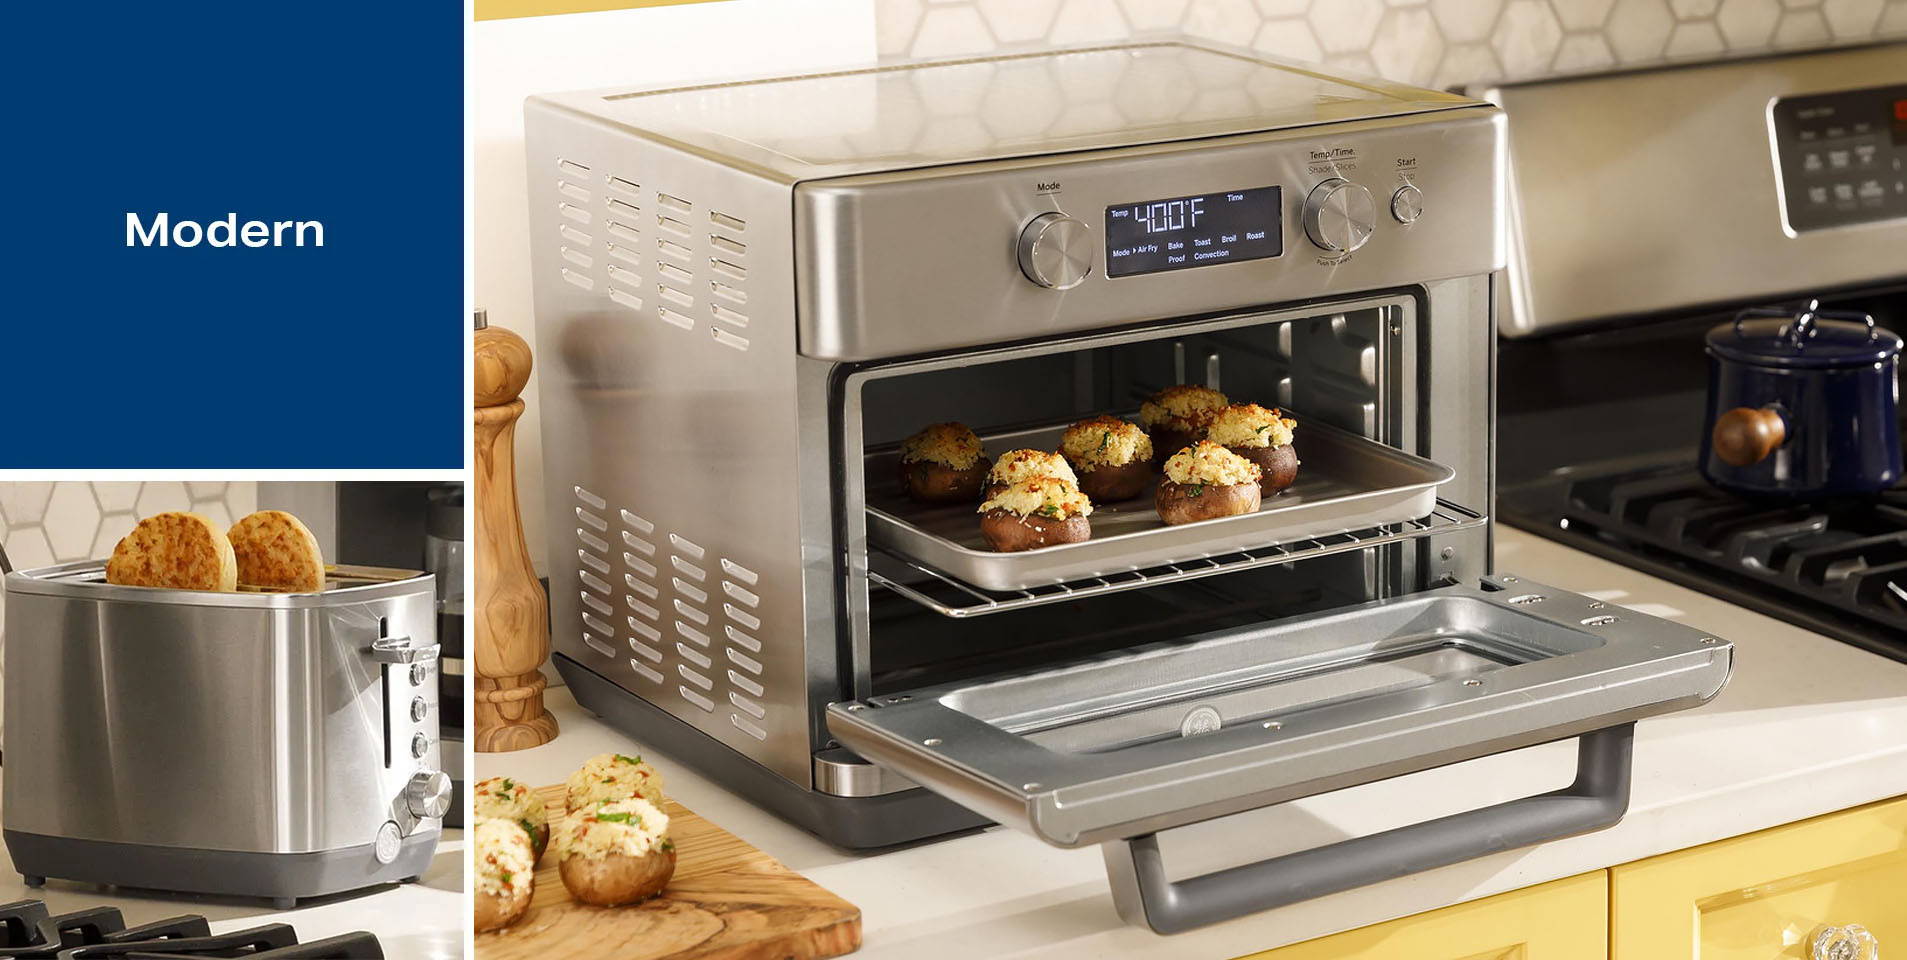 Modern - GE Small Appliances, Toasters and Air Fry Toaster Ovens for your countertop.